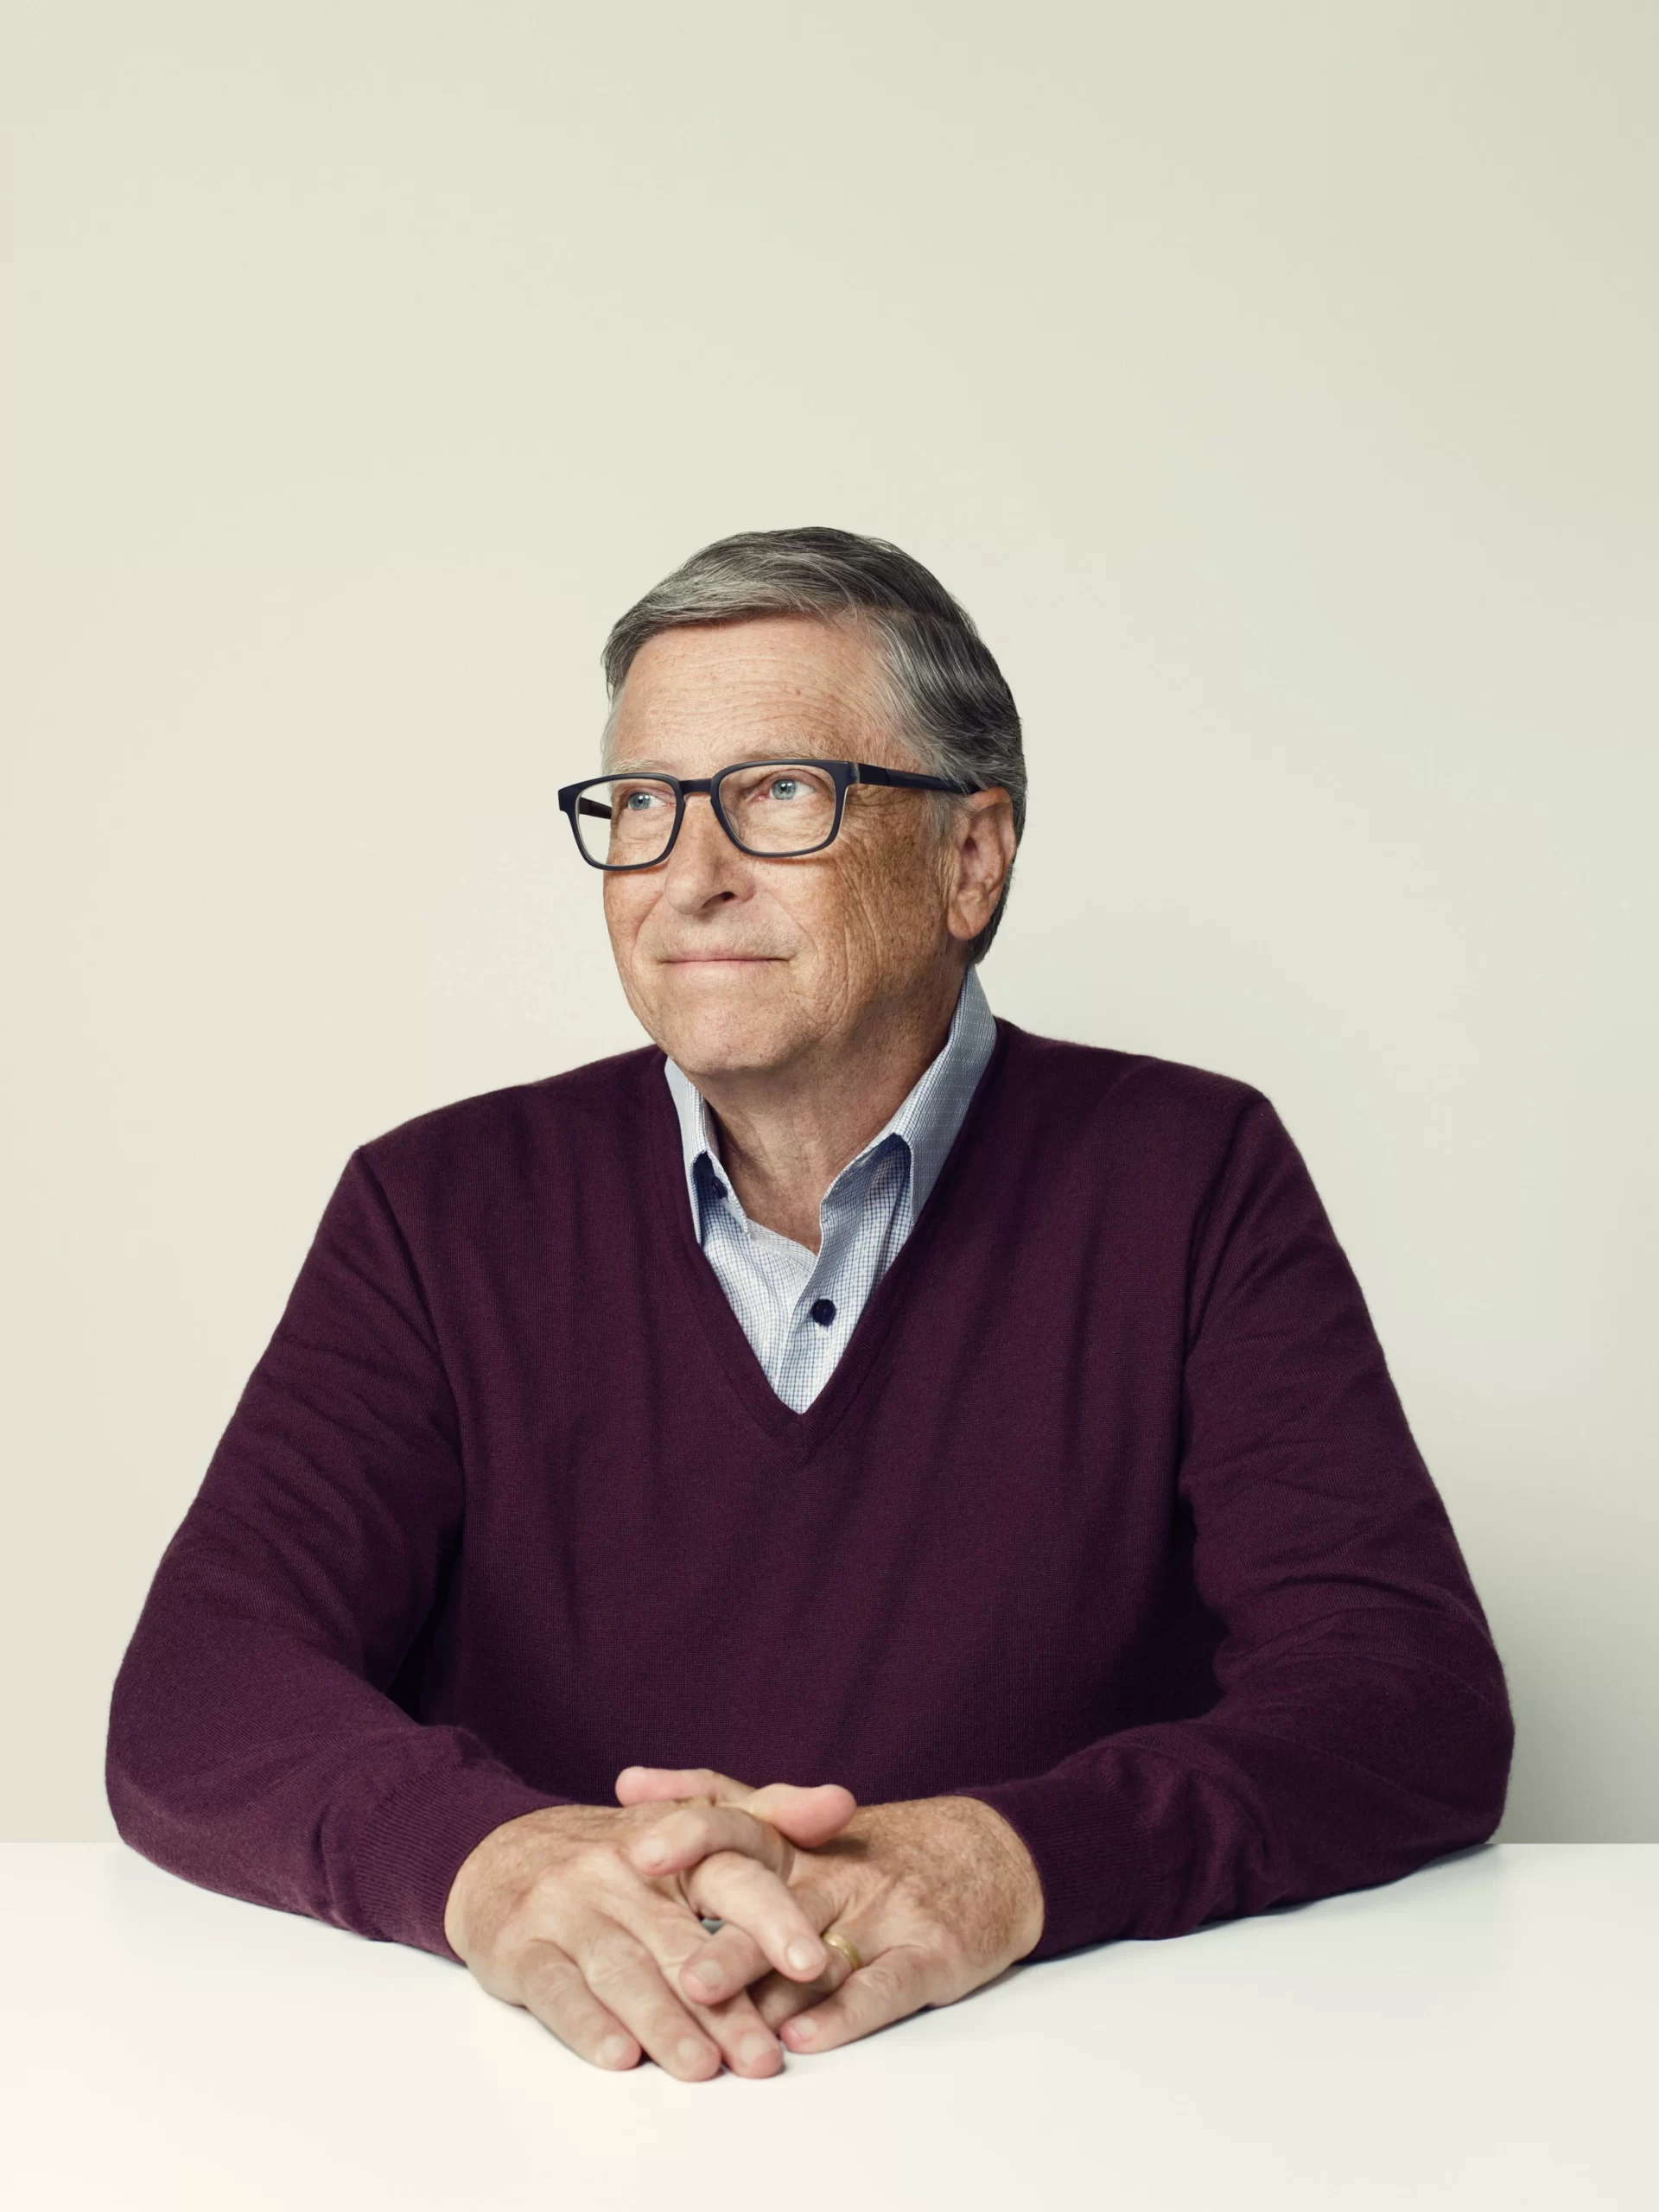 who is bill gates